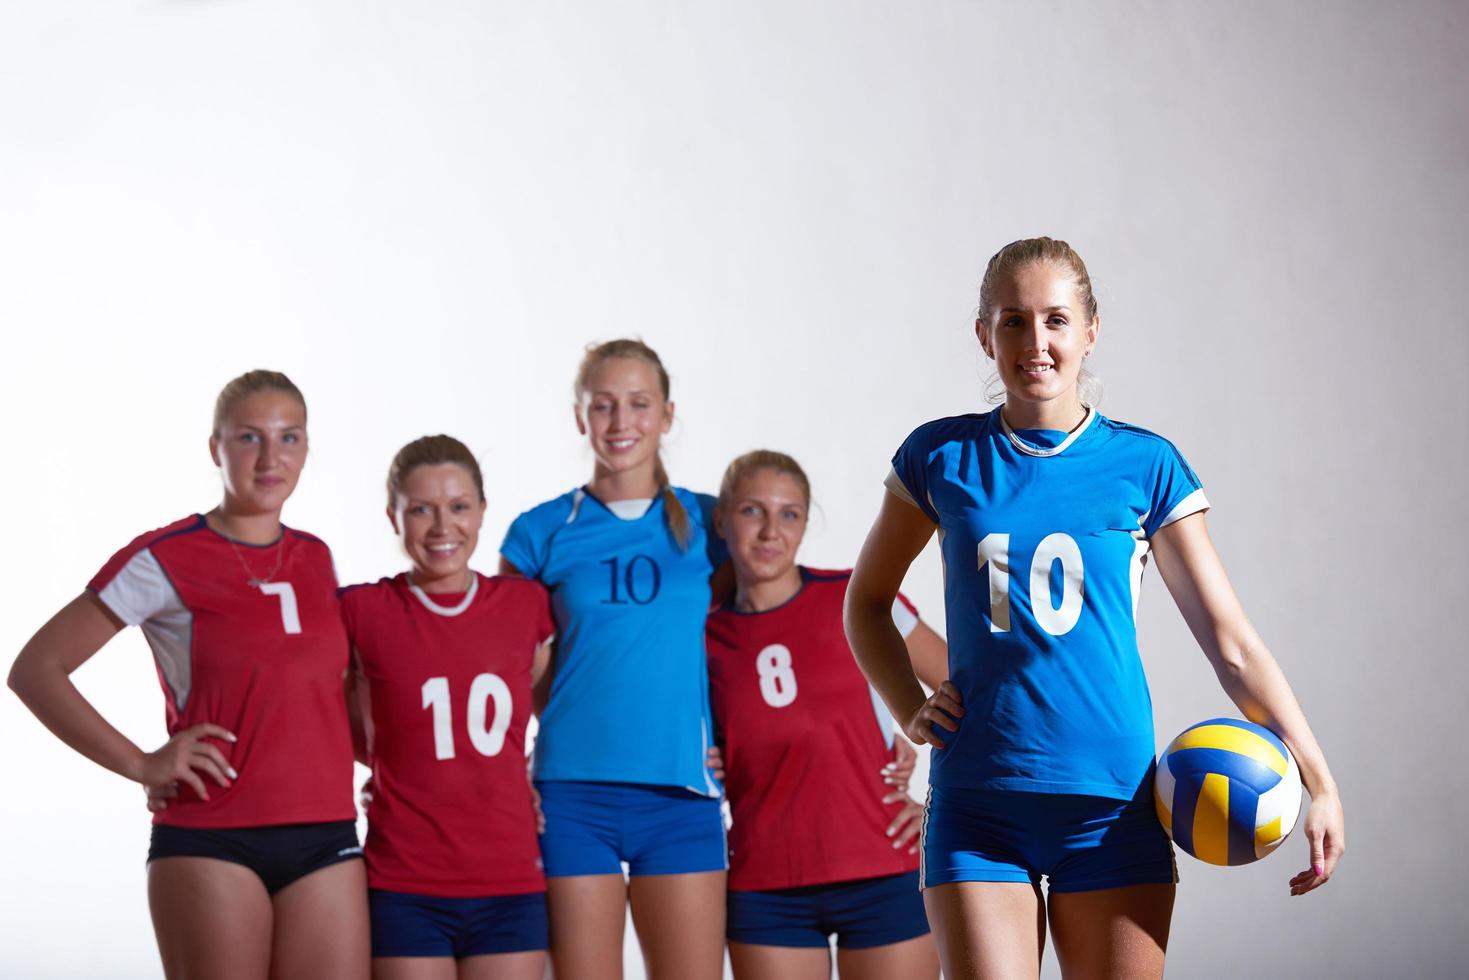 Volleyball-Frauengruppe foto